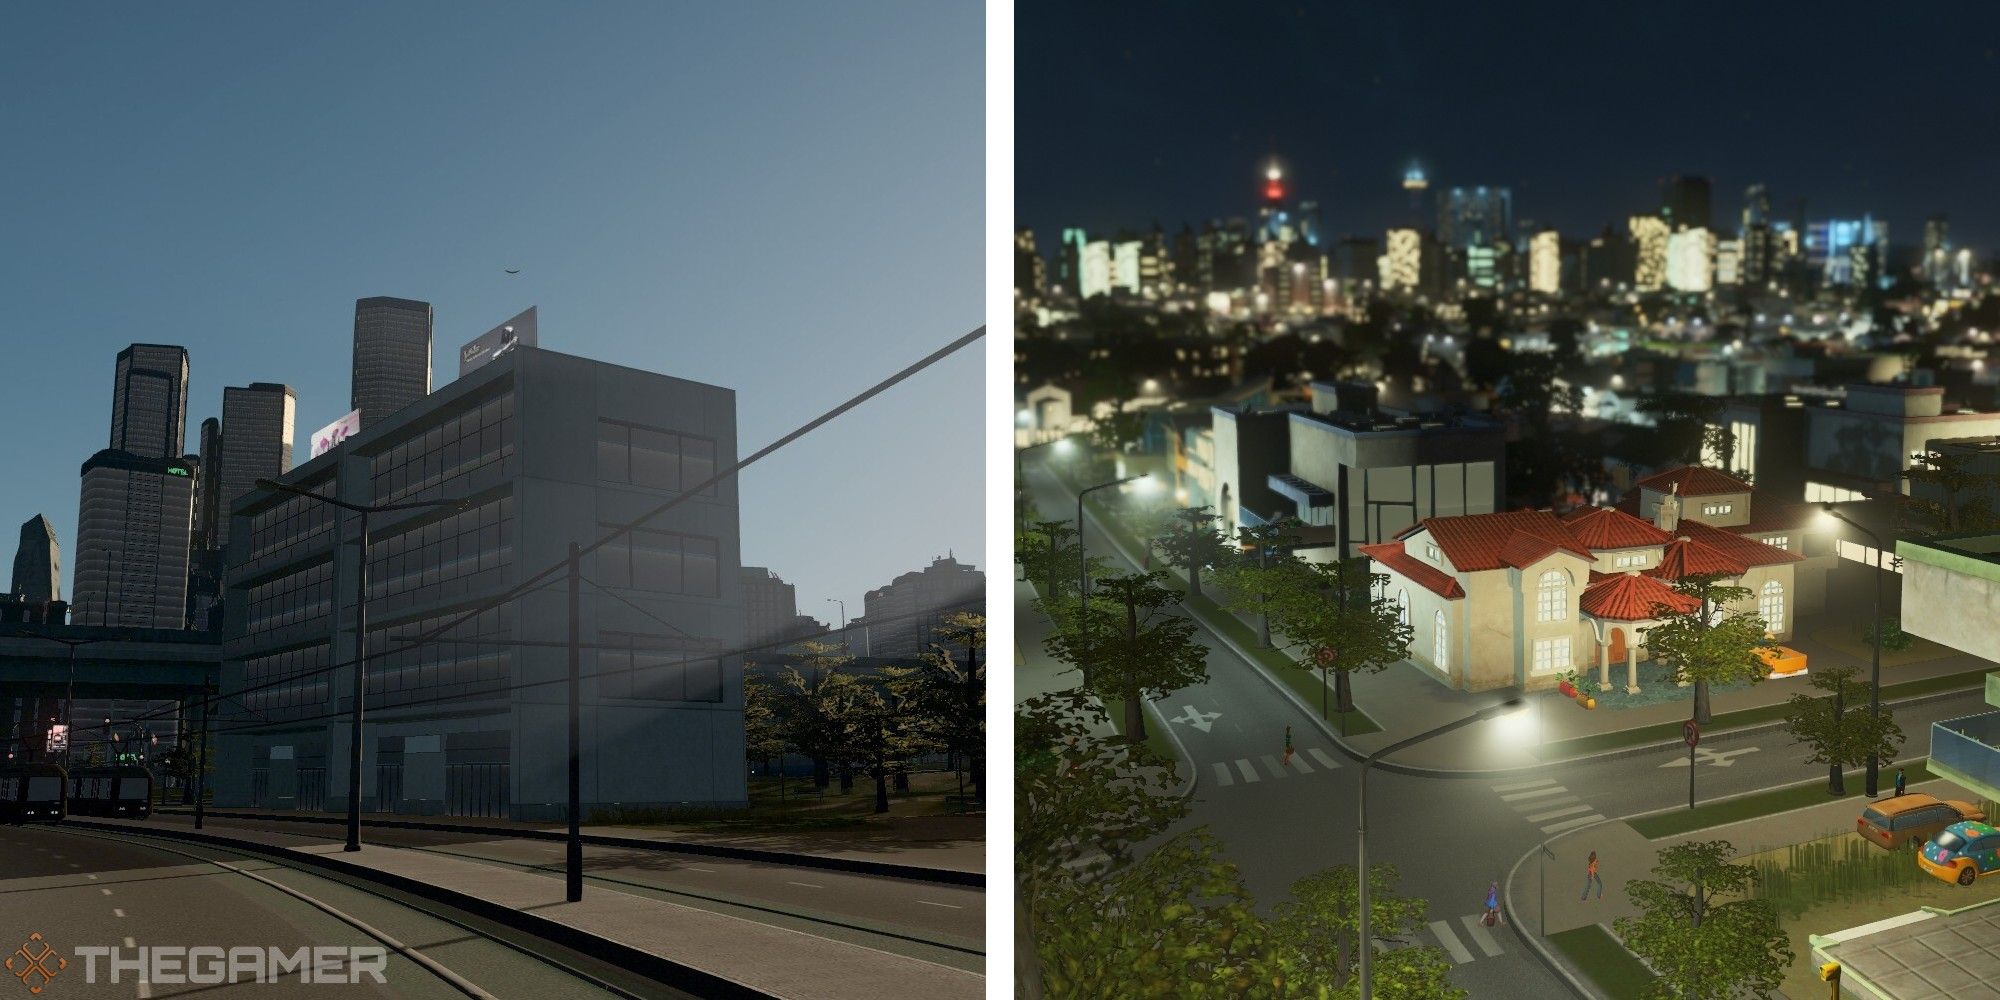 image of road during day next to image of residential area at night with city in background